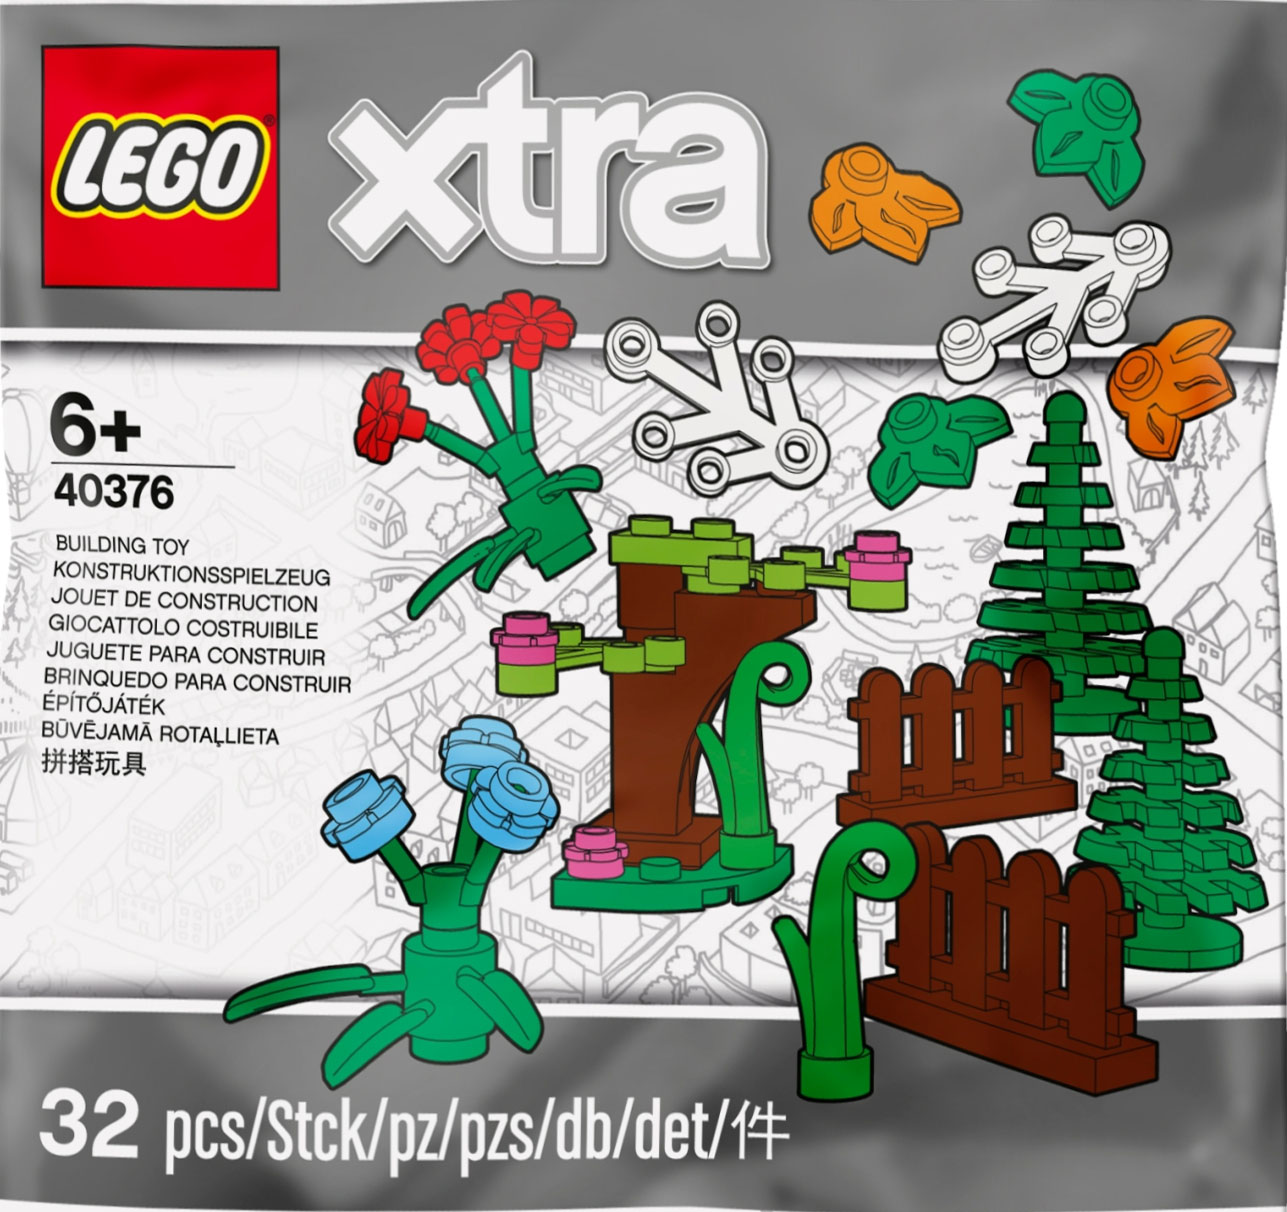 40376 Botanical Accessories LEGO information LEGO instructions LEGO video review